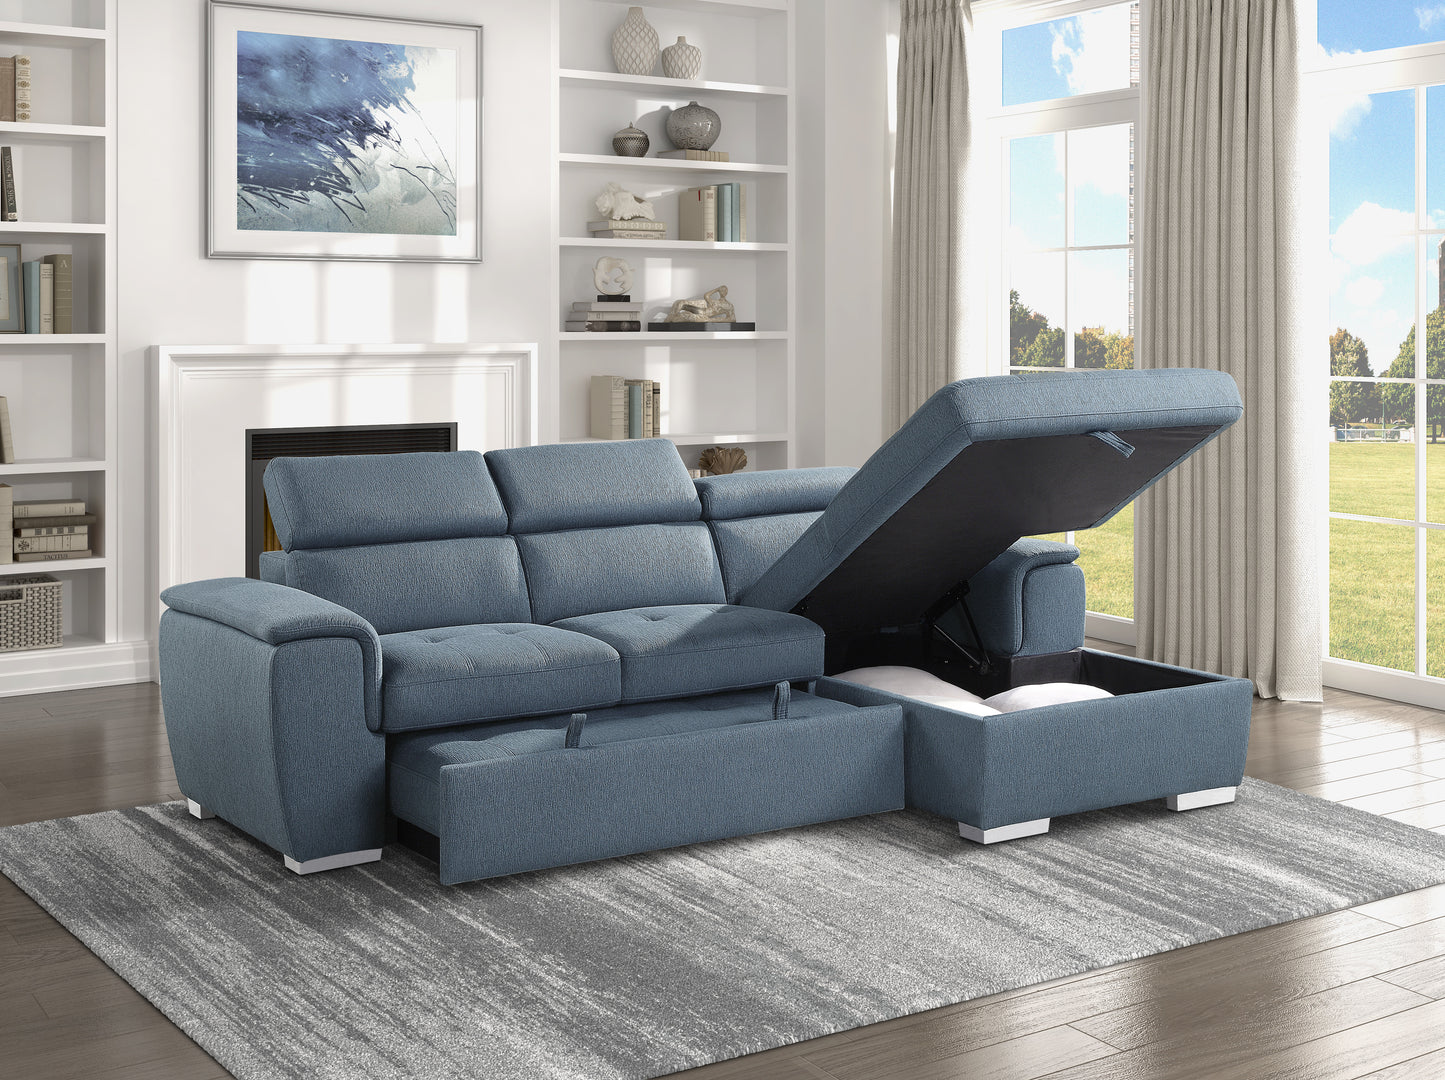 Berel 2-Pcs Sectional w/ Adj. Headrests, Pull-out Bed & Right Chaise w/Hidden Storage BLUE